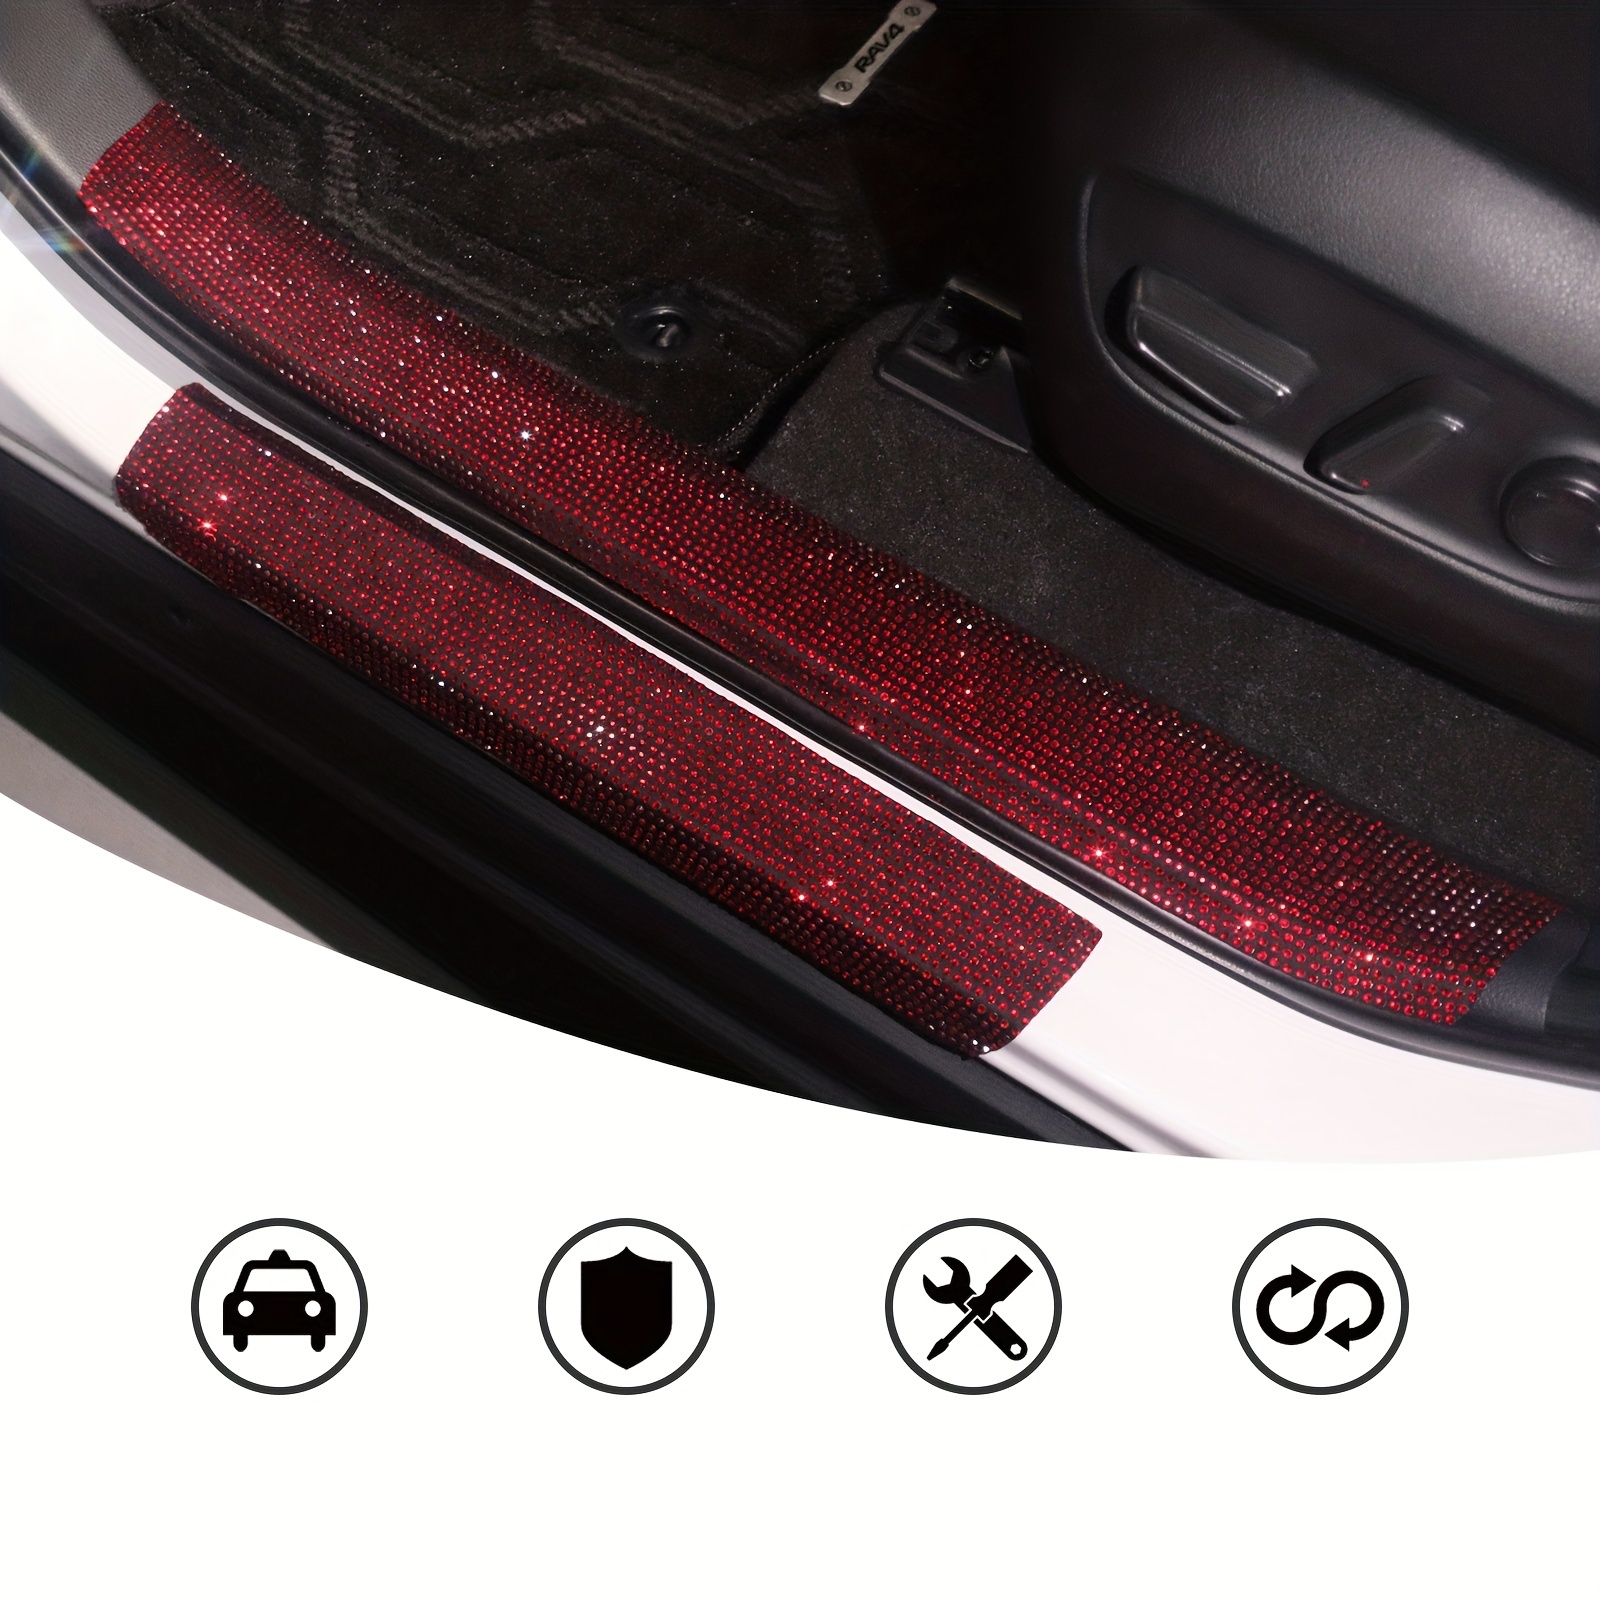 4pcs For Tesla Model 3 Protective Interior Sticker Car Styling Pu Leather Carbon  Fiber Style Door Sill Strip Scuff Plate - Automotive Interior Stickers -  AliExpress